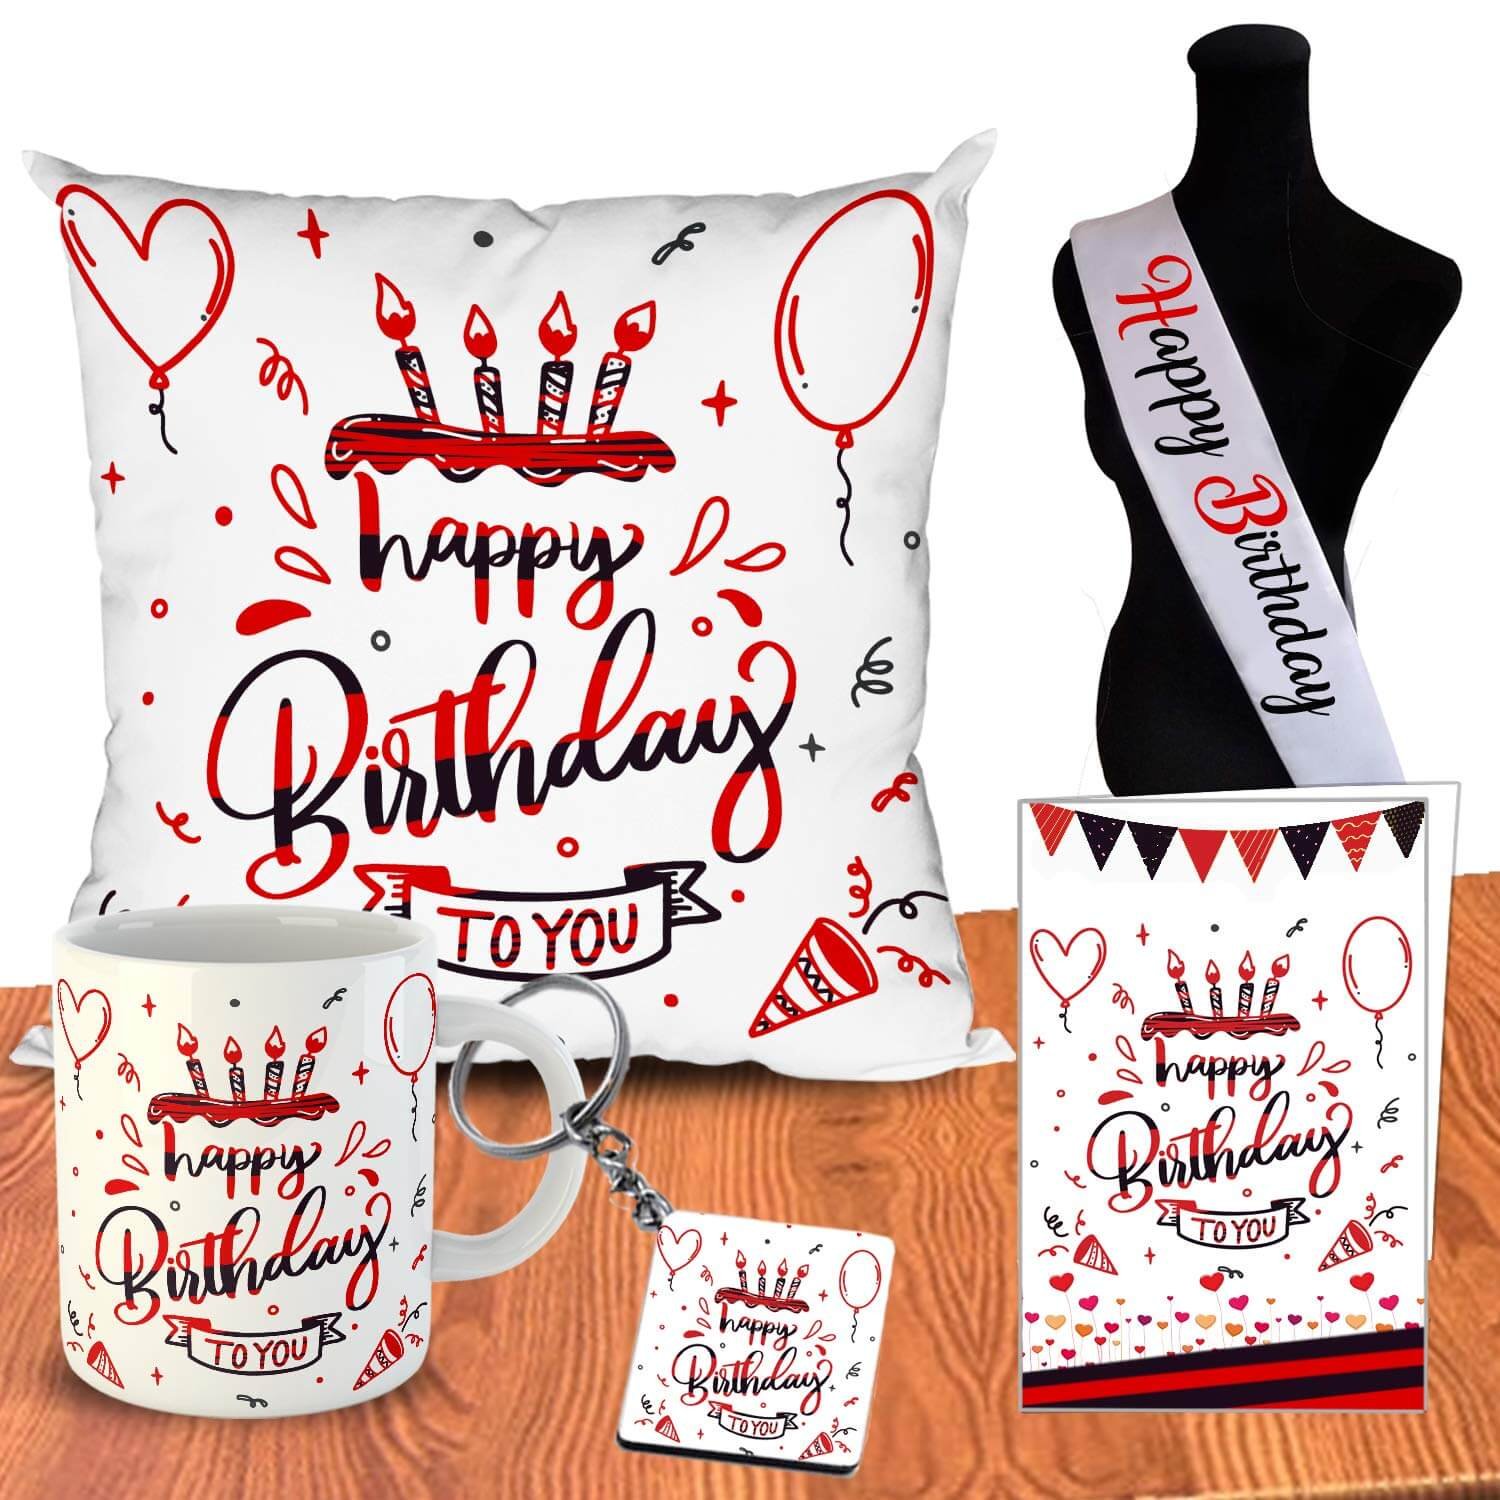 ODDCLICK Micro Fibre Cushion Cover with Filler, Mug, Keychain, Greeting Card, Birthday Sash Set, 12x12 Inch, 5 Pieces, Polycotton